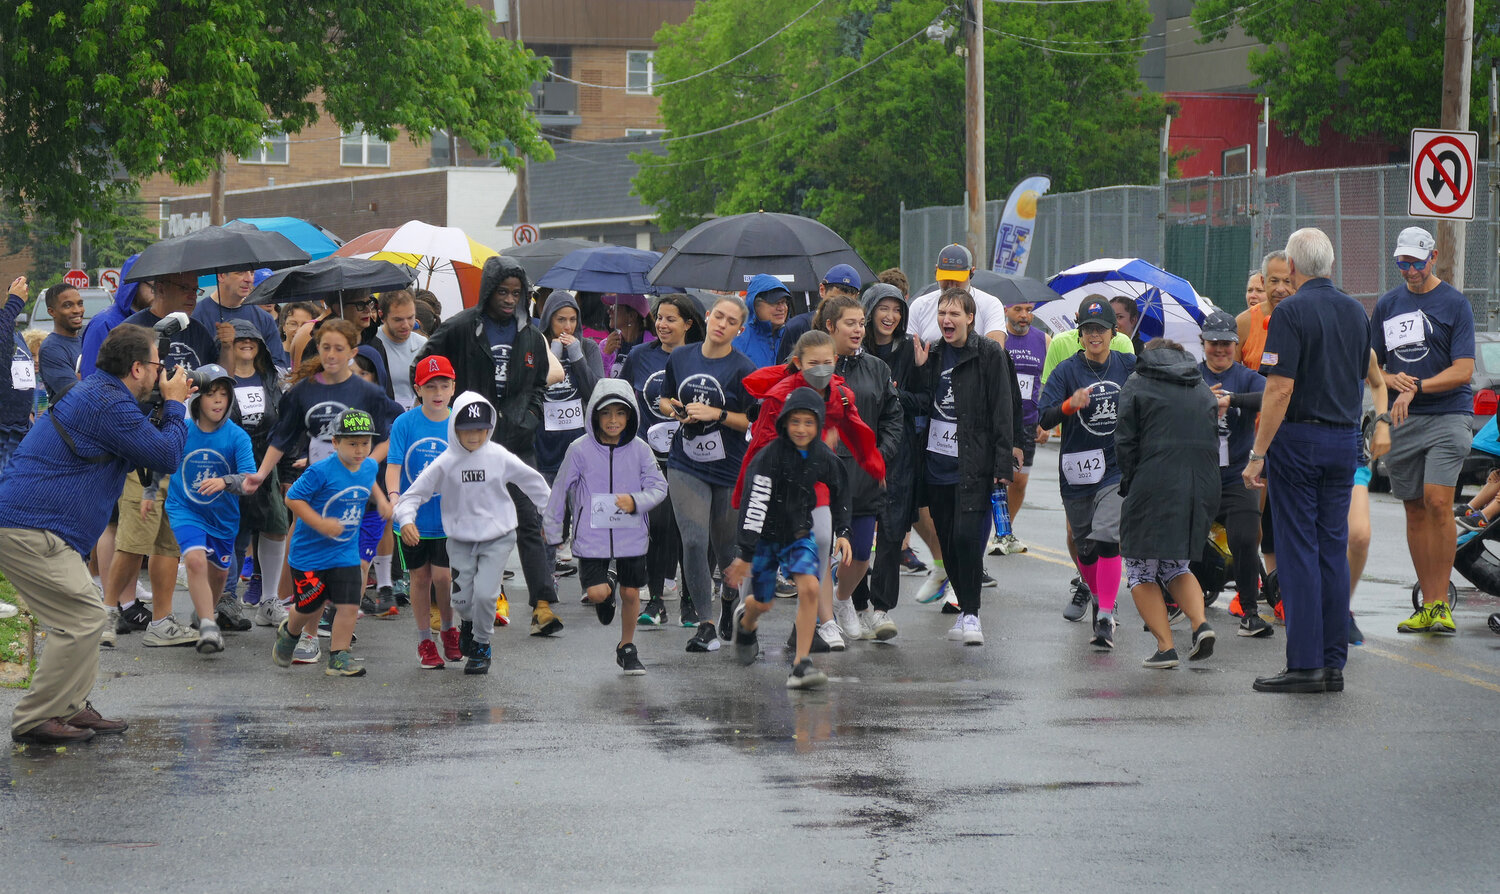 The first-ever Brandeis 5K Run and Walk took place in 2019 and more than 150 people particpated. For the 2022 event, it was named after the former chair Co-President, Russell Friedman. Last year, rain did not stop participants.